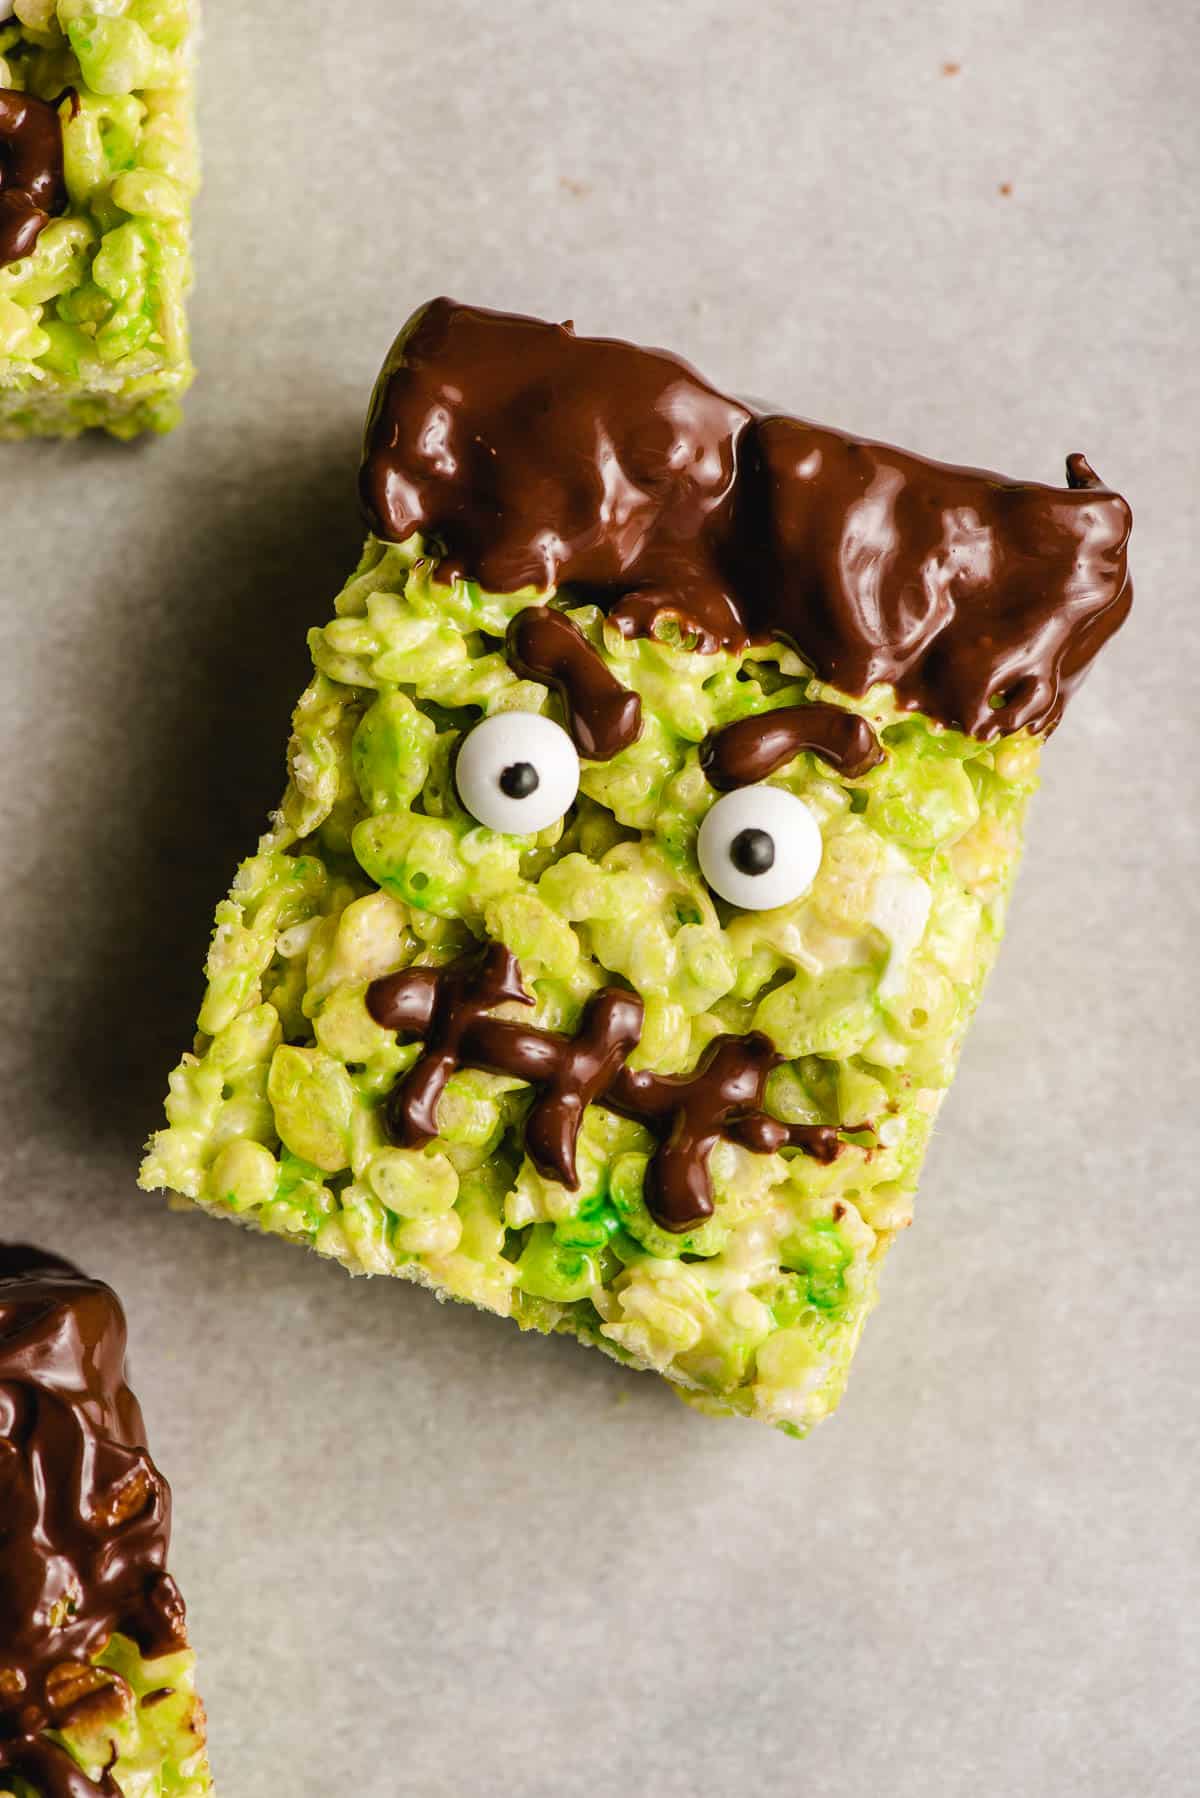 Frankenstein rice krispie treat with angry eyebrows, googly eyes, and a chocolate stitched mouth.